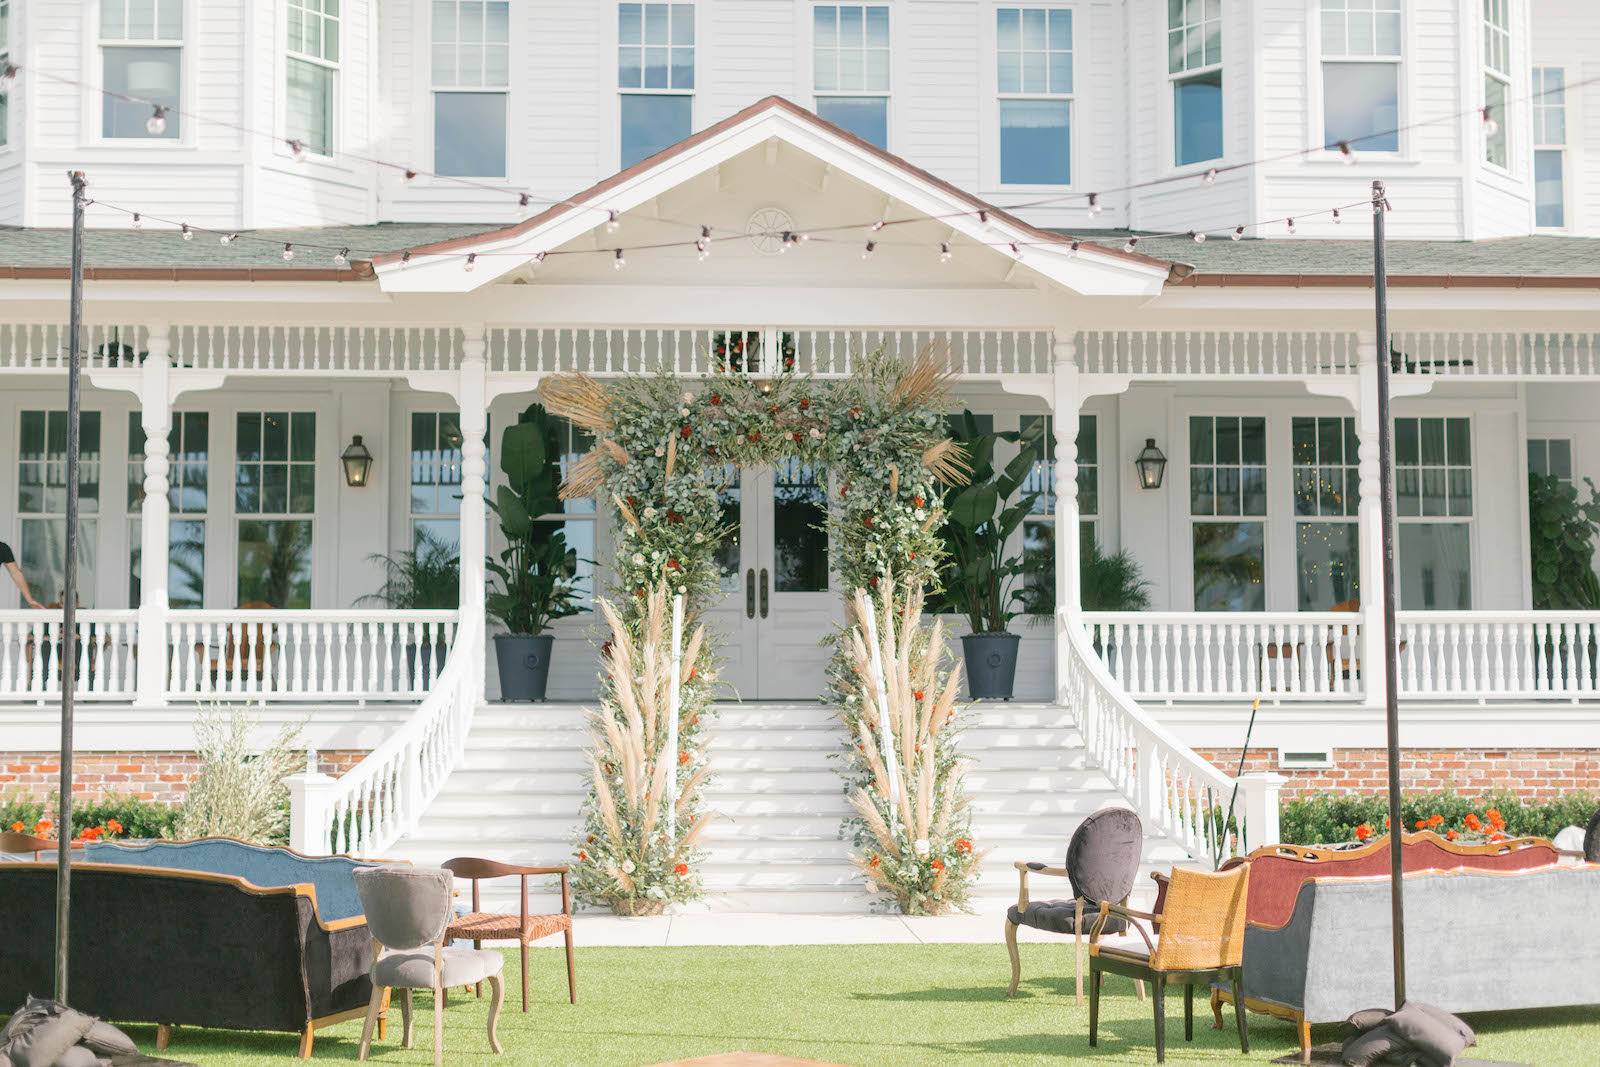 Boho Garden Wedding Ceremony Decor, Lounge Seating, Vintage Couches, Lush Greenery and Floral Arch with Pampas Grass Arrangements, String Lights | Tampa Bay Wedding Planner Parties A'la Carte | Florida Wedding Venue Belleview Inn